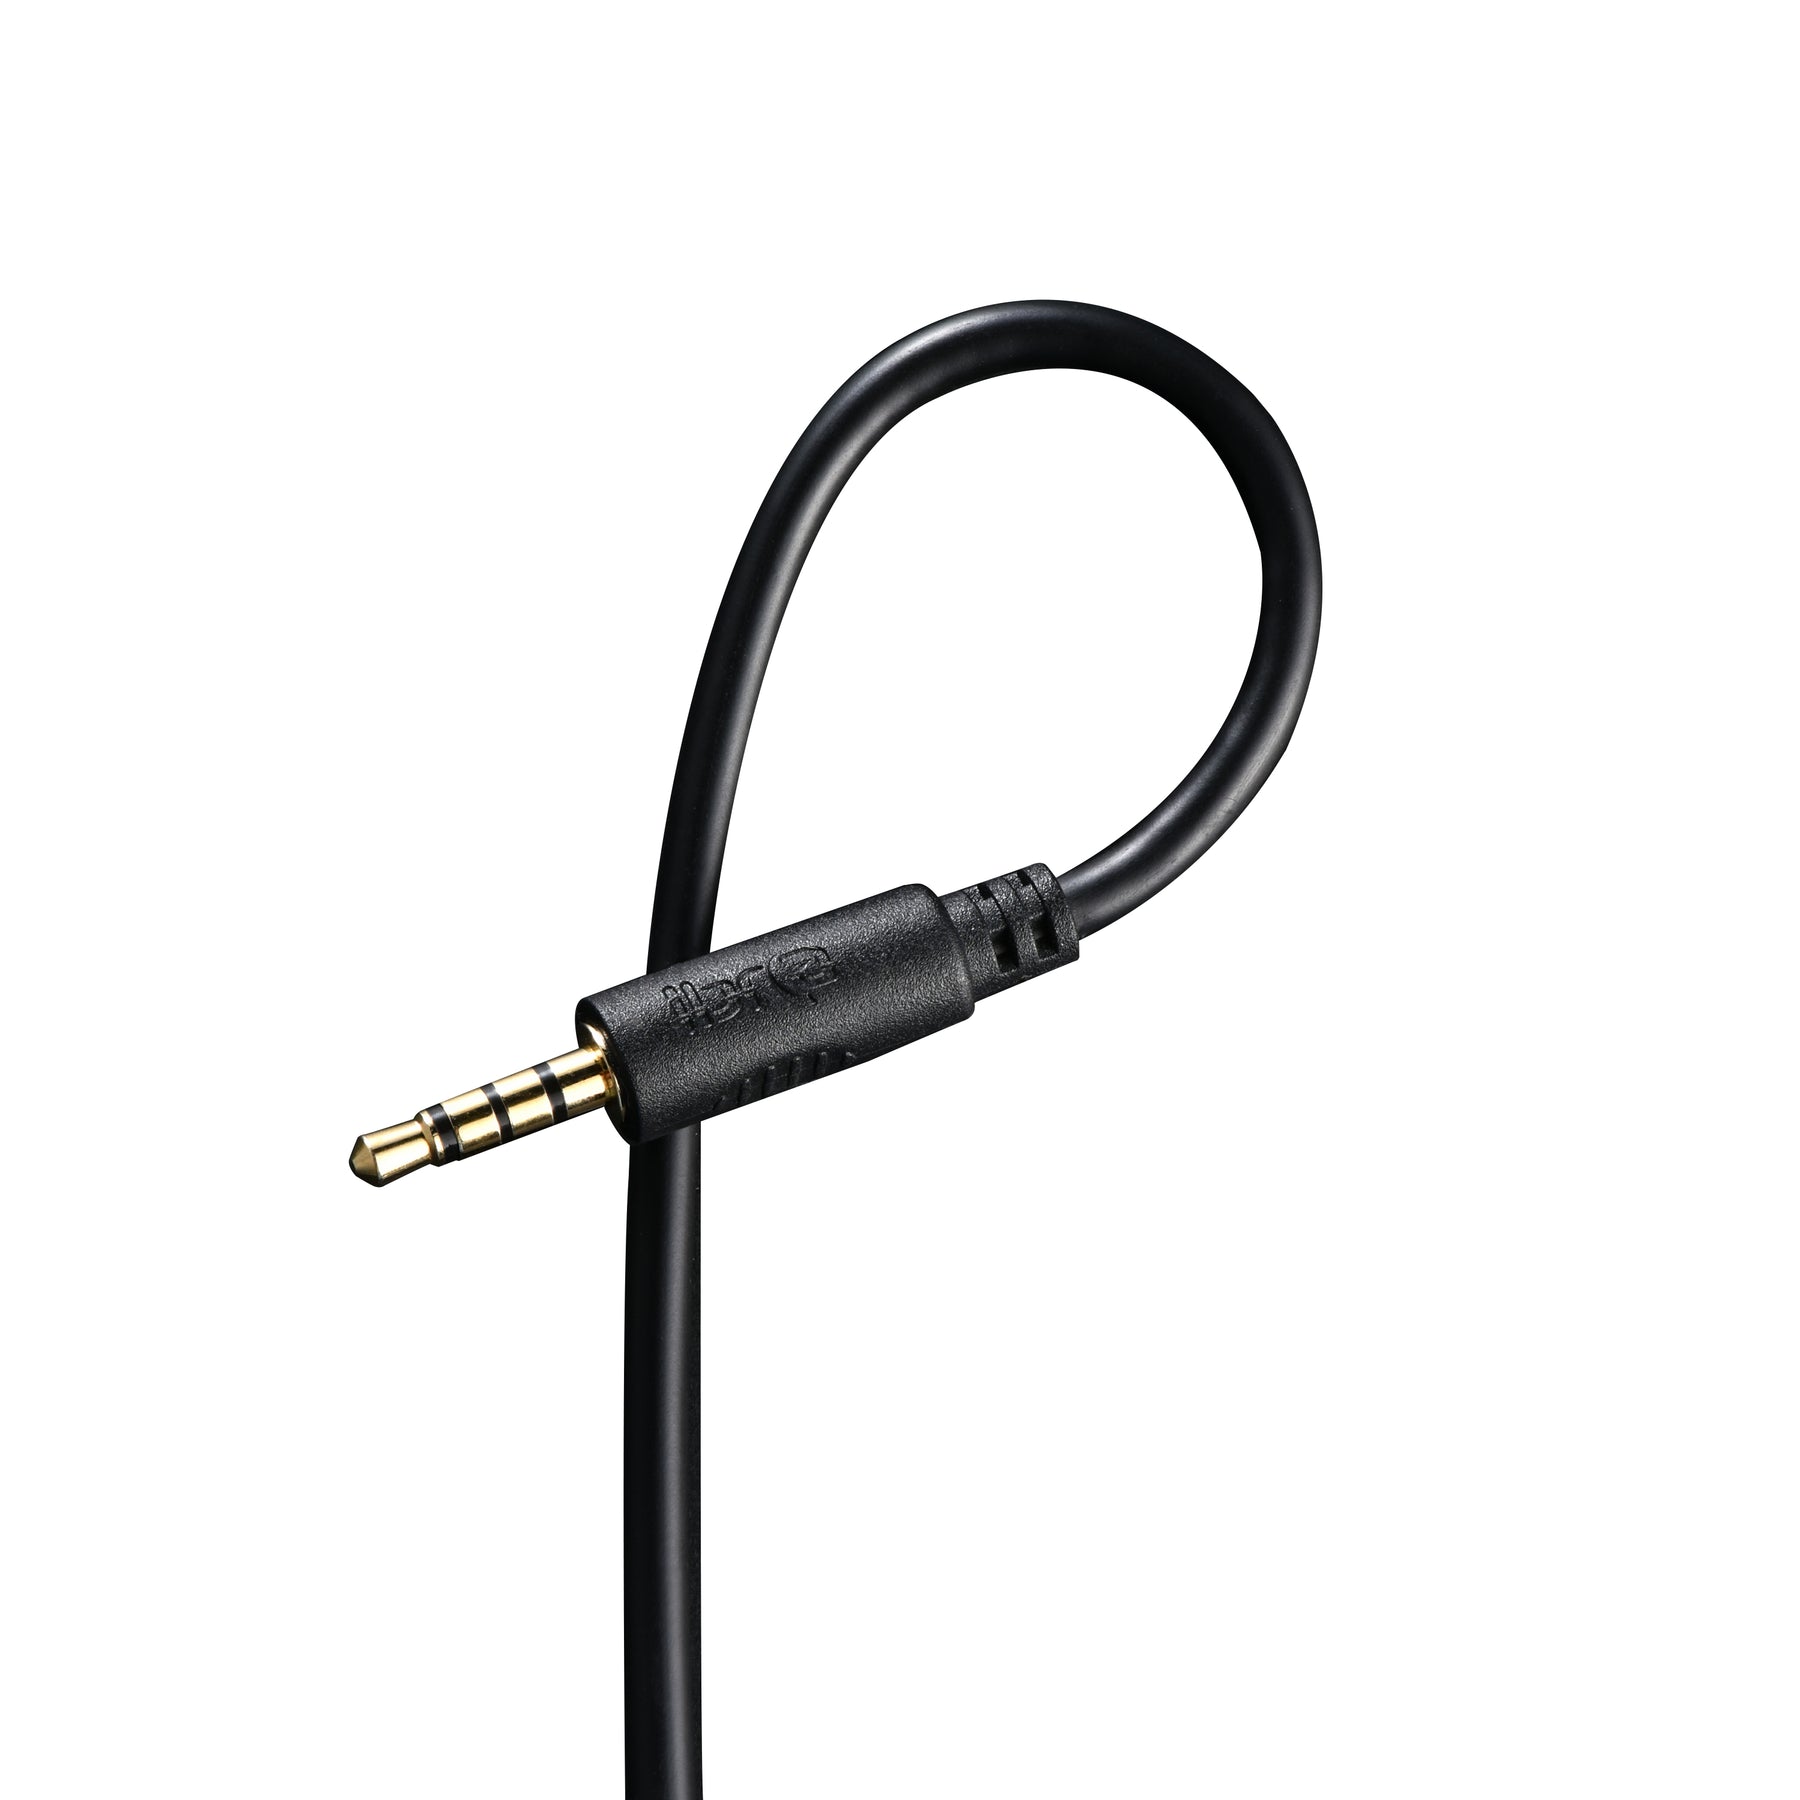 IBRA Headphone Extension Cable 0.5M Aux Stereo Jack Lead 3.5mm Male to Female Audio Cable Earphone Extender Cord Compatible With Laptop PC iPhone iPad Tablet Headset TV PS4 Speaker Smartphone-Black